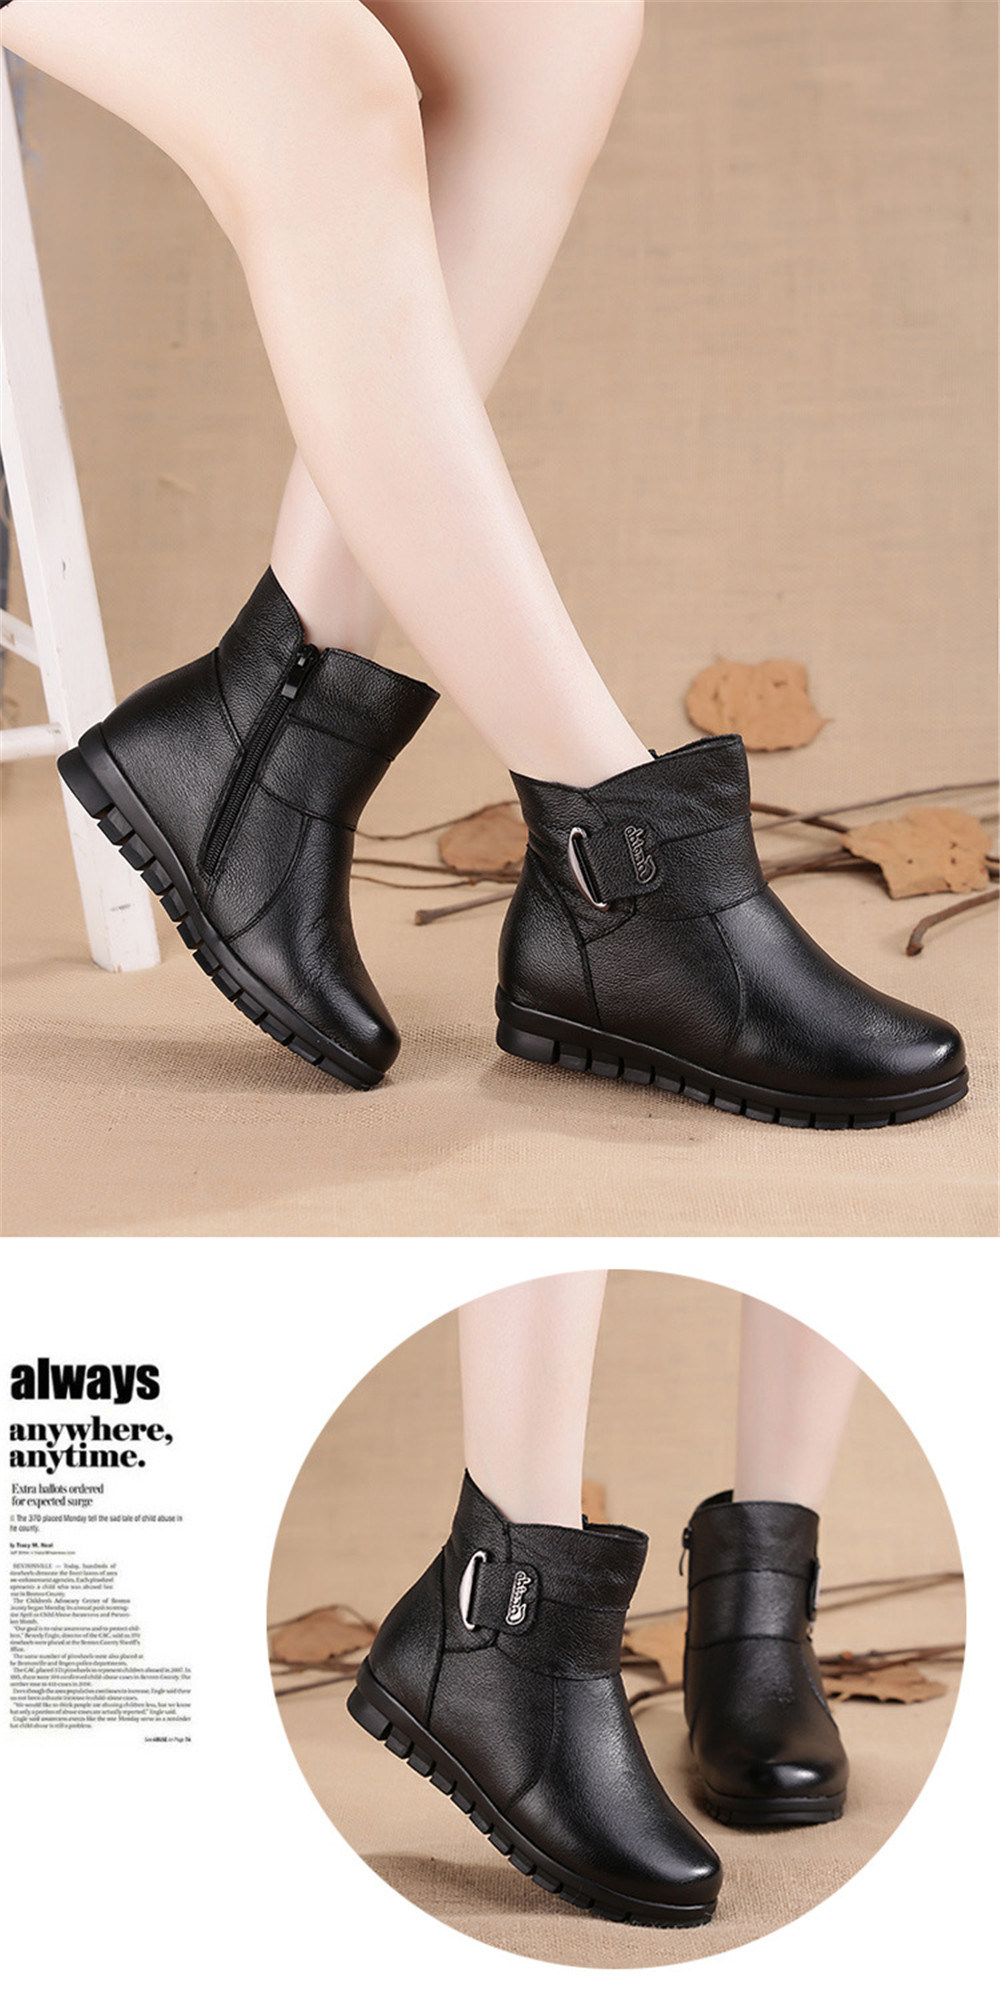 Lady Leather Boots/Fashion Leather Boots/Female Snow Boots